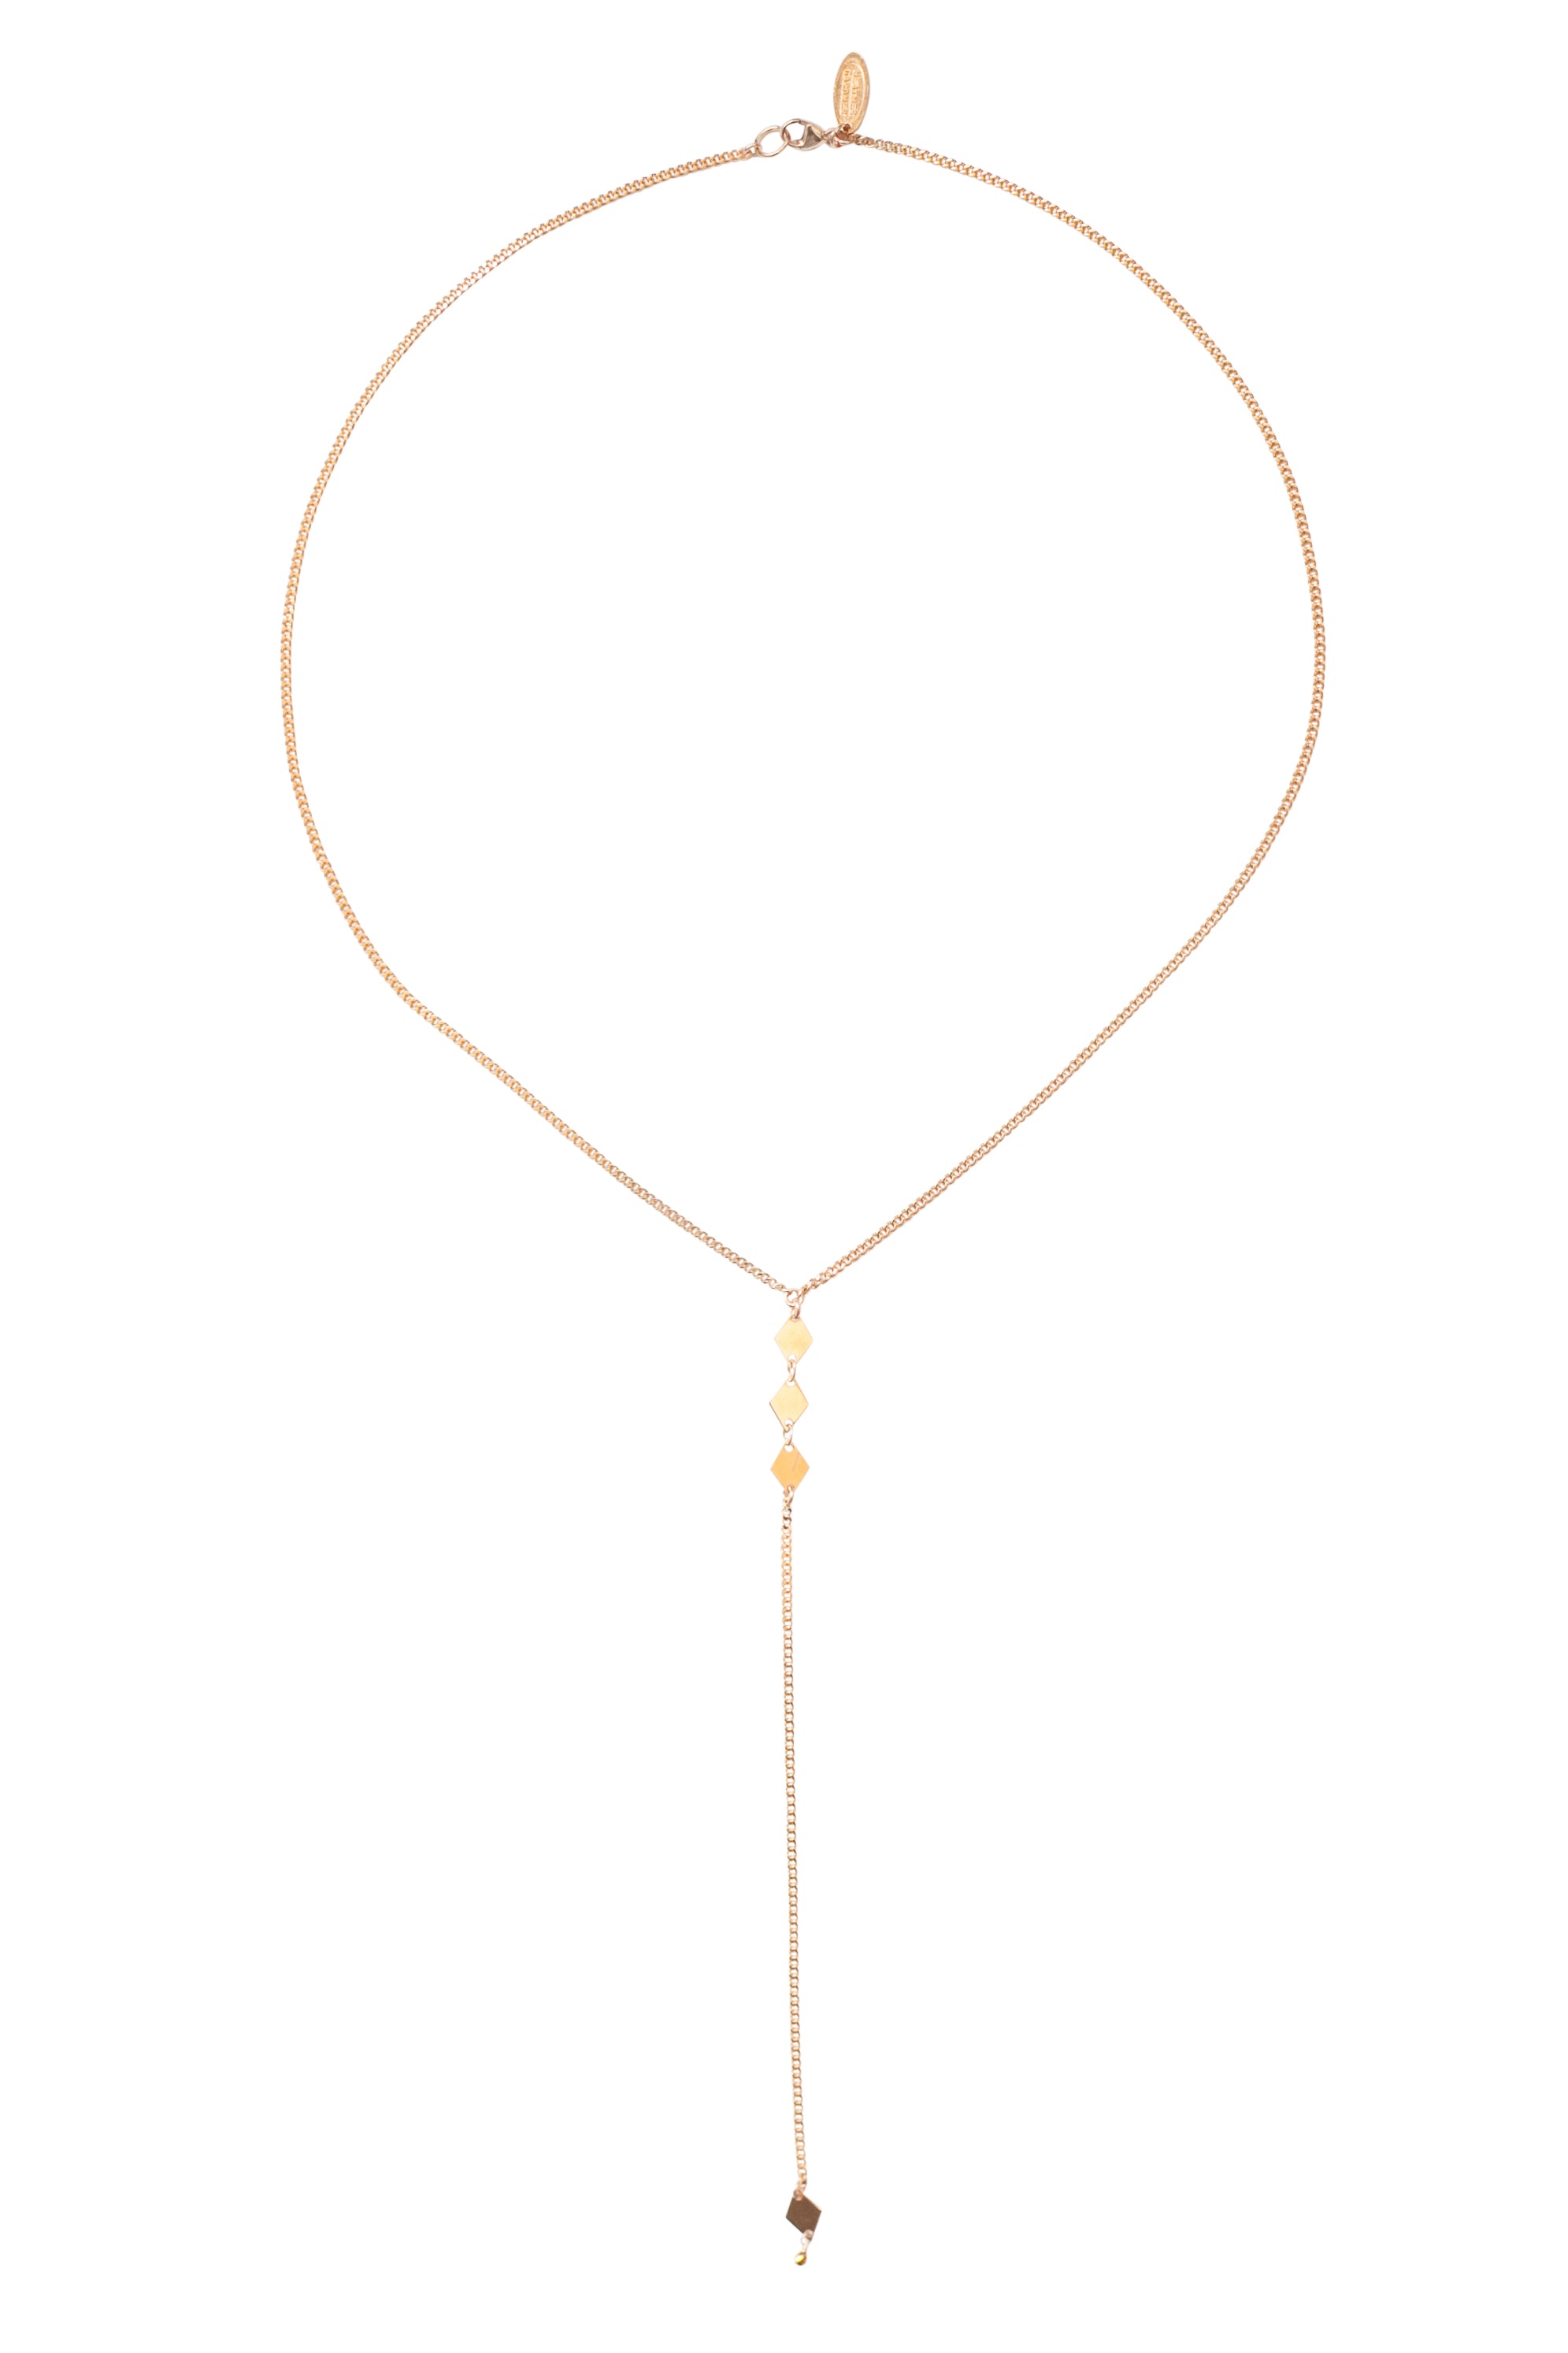 Diamond Lariat Necklace in Gold, Silver or Rose Gold